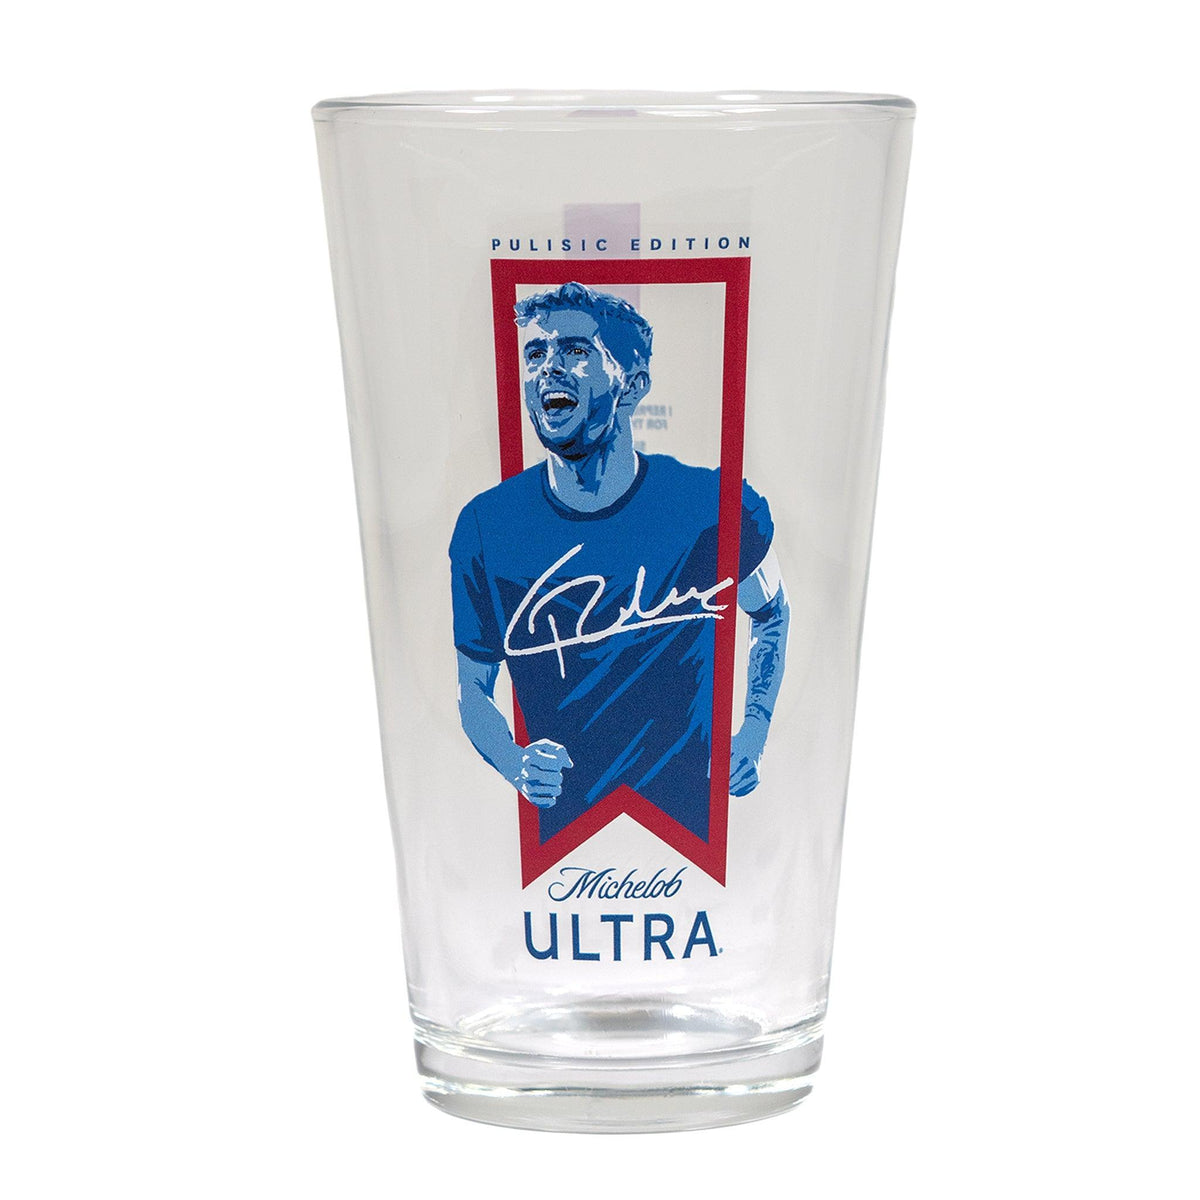 https://www.shopbeergears.shop/wp-content/uploads/1692/92/discover-our-site-refresh-pulisic-world-cup-pint-michelob-ultra-collection-and-step-into-style_0.jpg